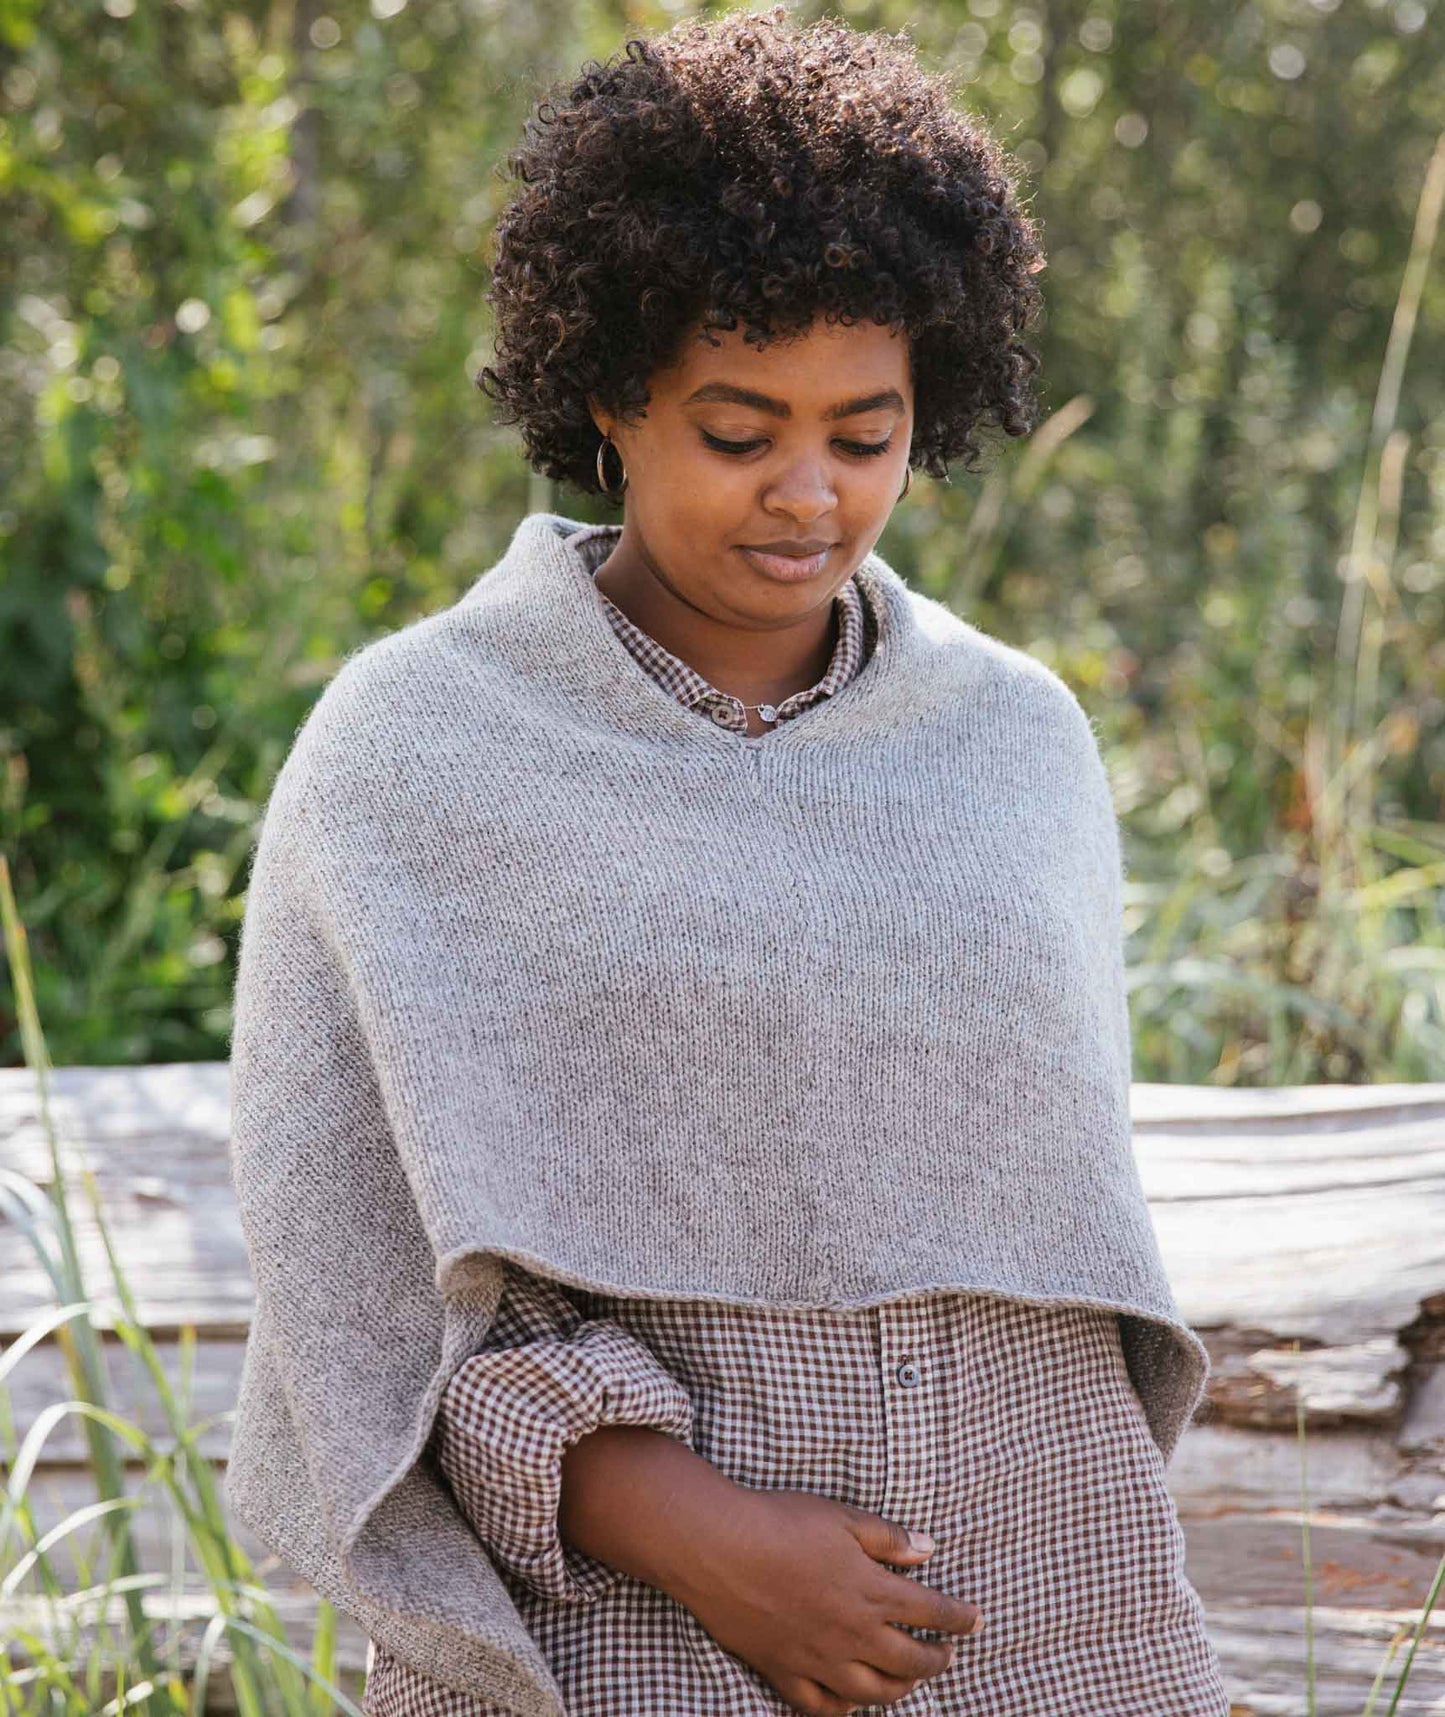 Easy Folded Poncho - Ombré Version Using Isager Spinni Wool 1